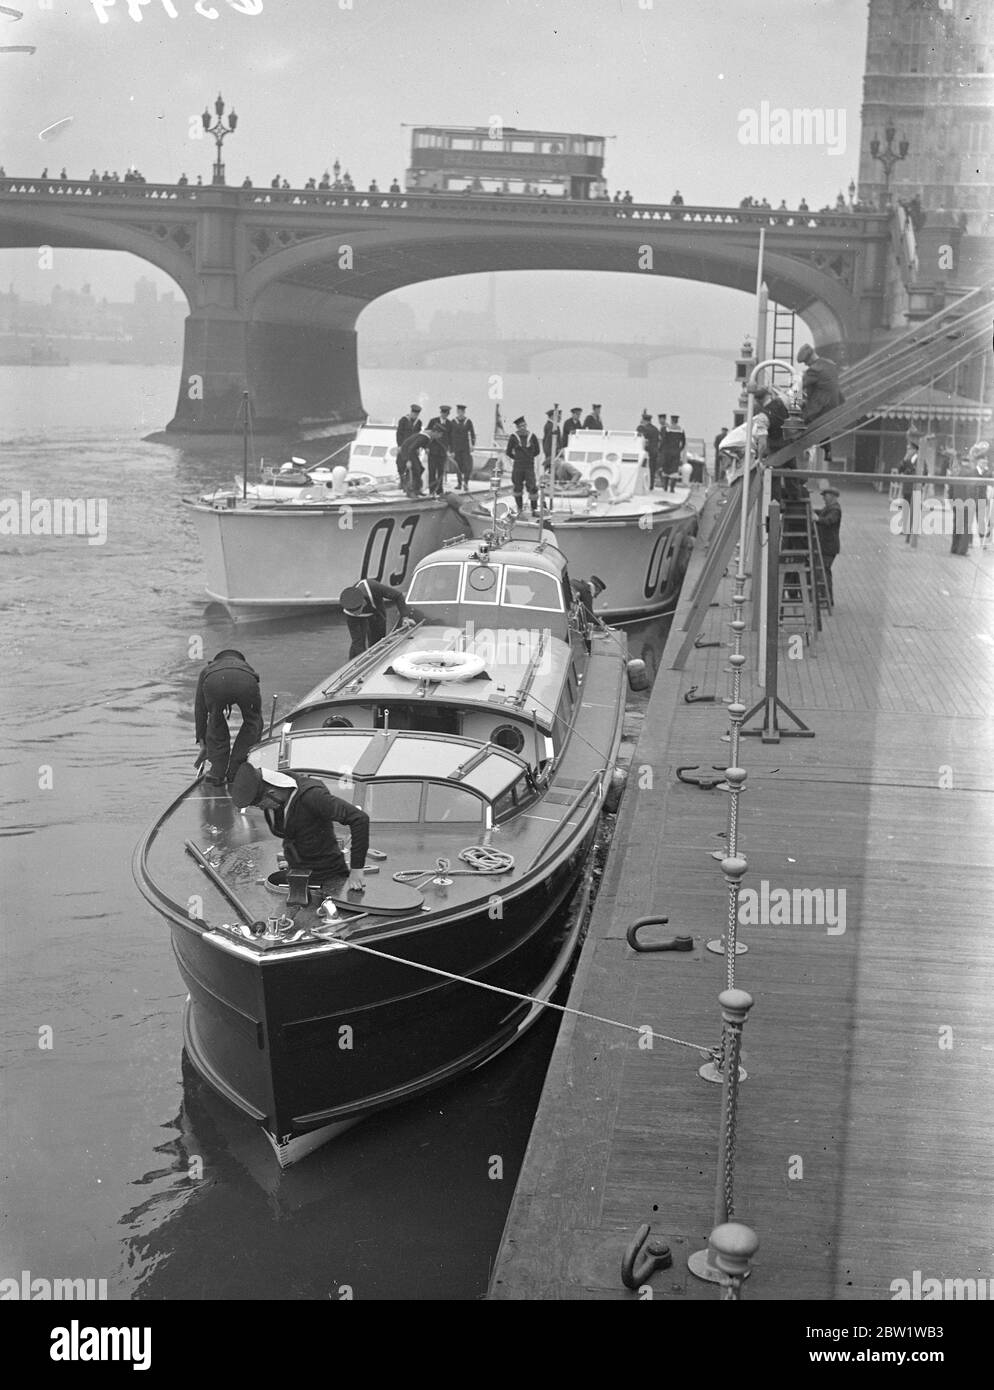 King is barge moored in Pool of London. The Astros barged (extreme right), in which the King and Queen will go to Greenwich for the opening of the National Maritime Museum next Tuesday, moored with the accompanying motor torpedo boats alongside the destroyer's 'HMS Wishart (D67)' in the Pool of London. The 'Wishart', watch was to act as escort but was damaged when mooring in the Pool. 24 April 1937 Stock Photo